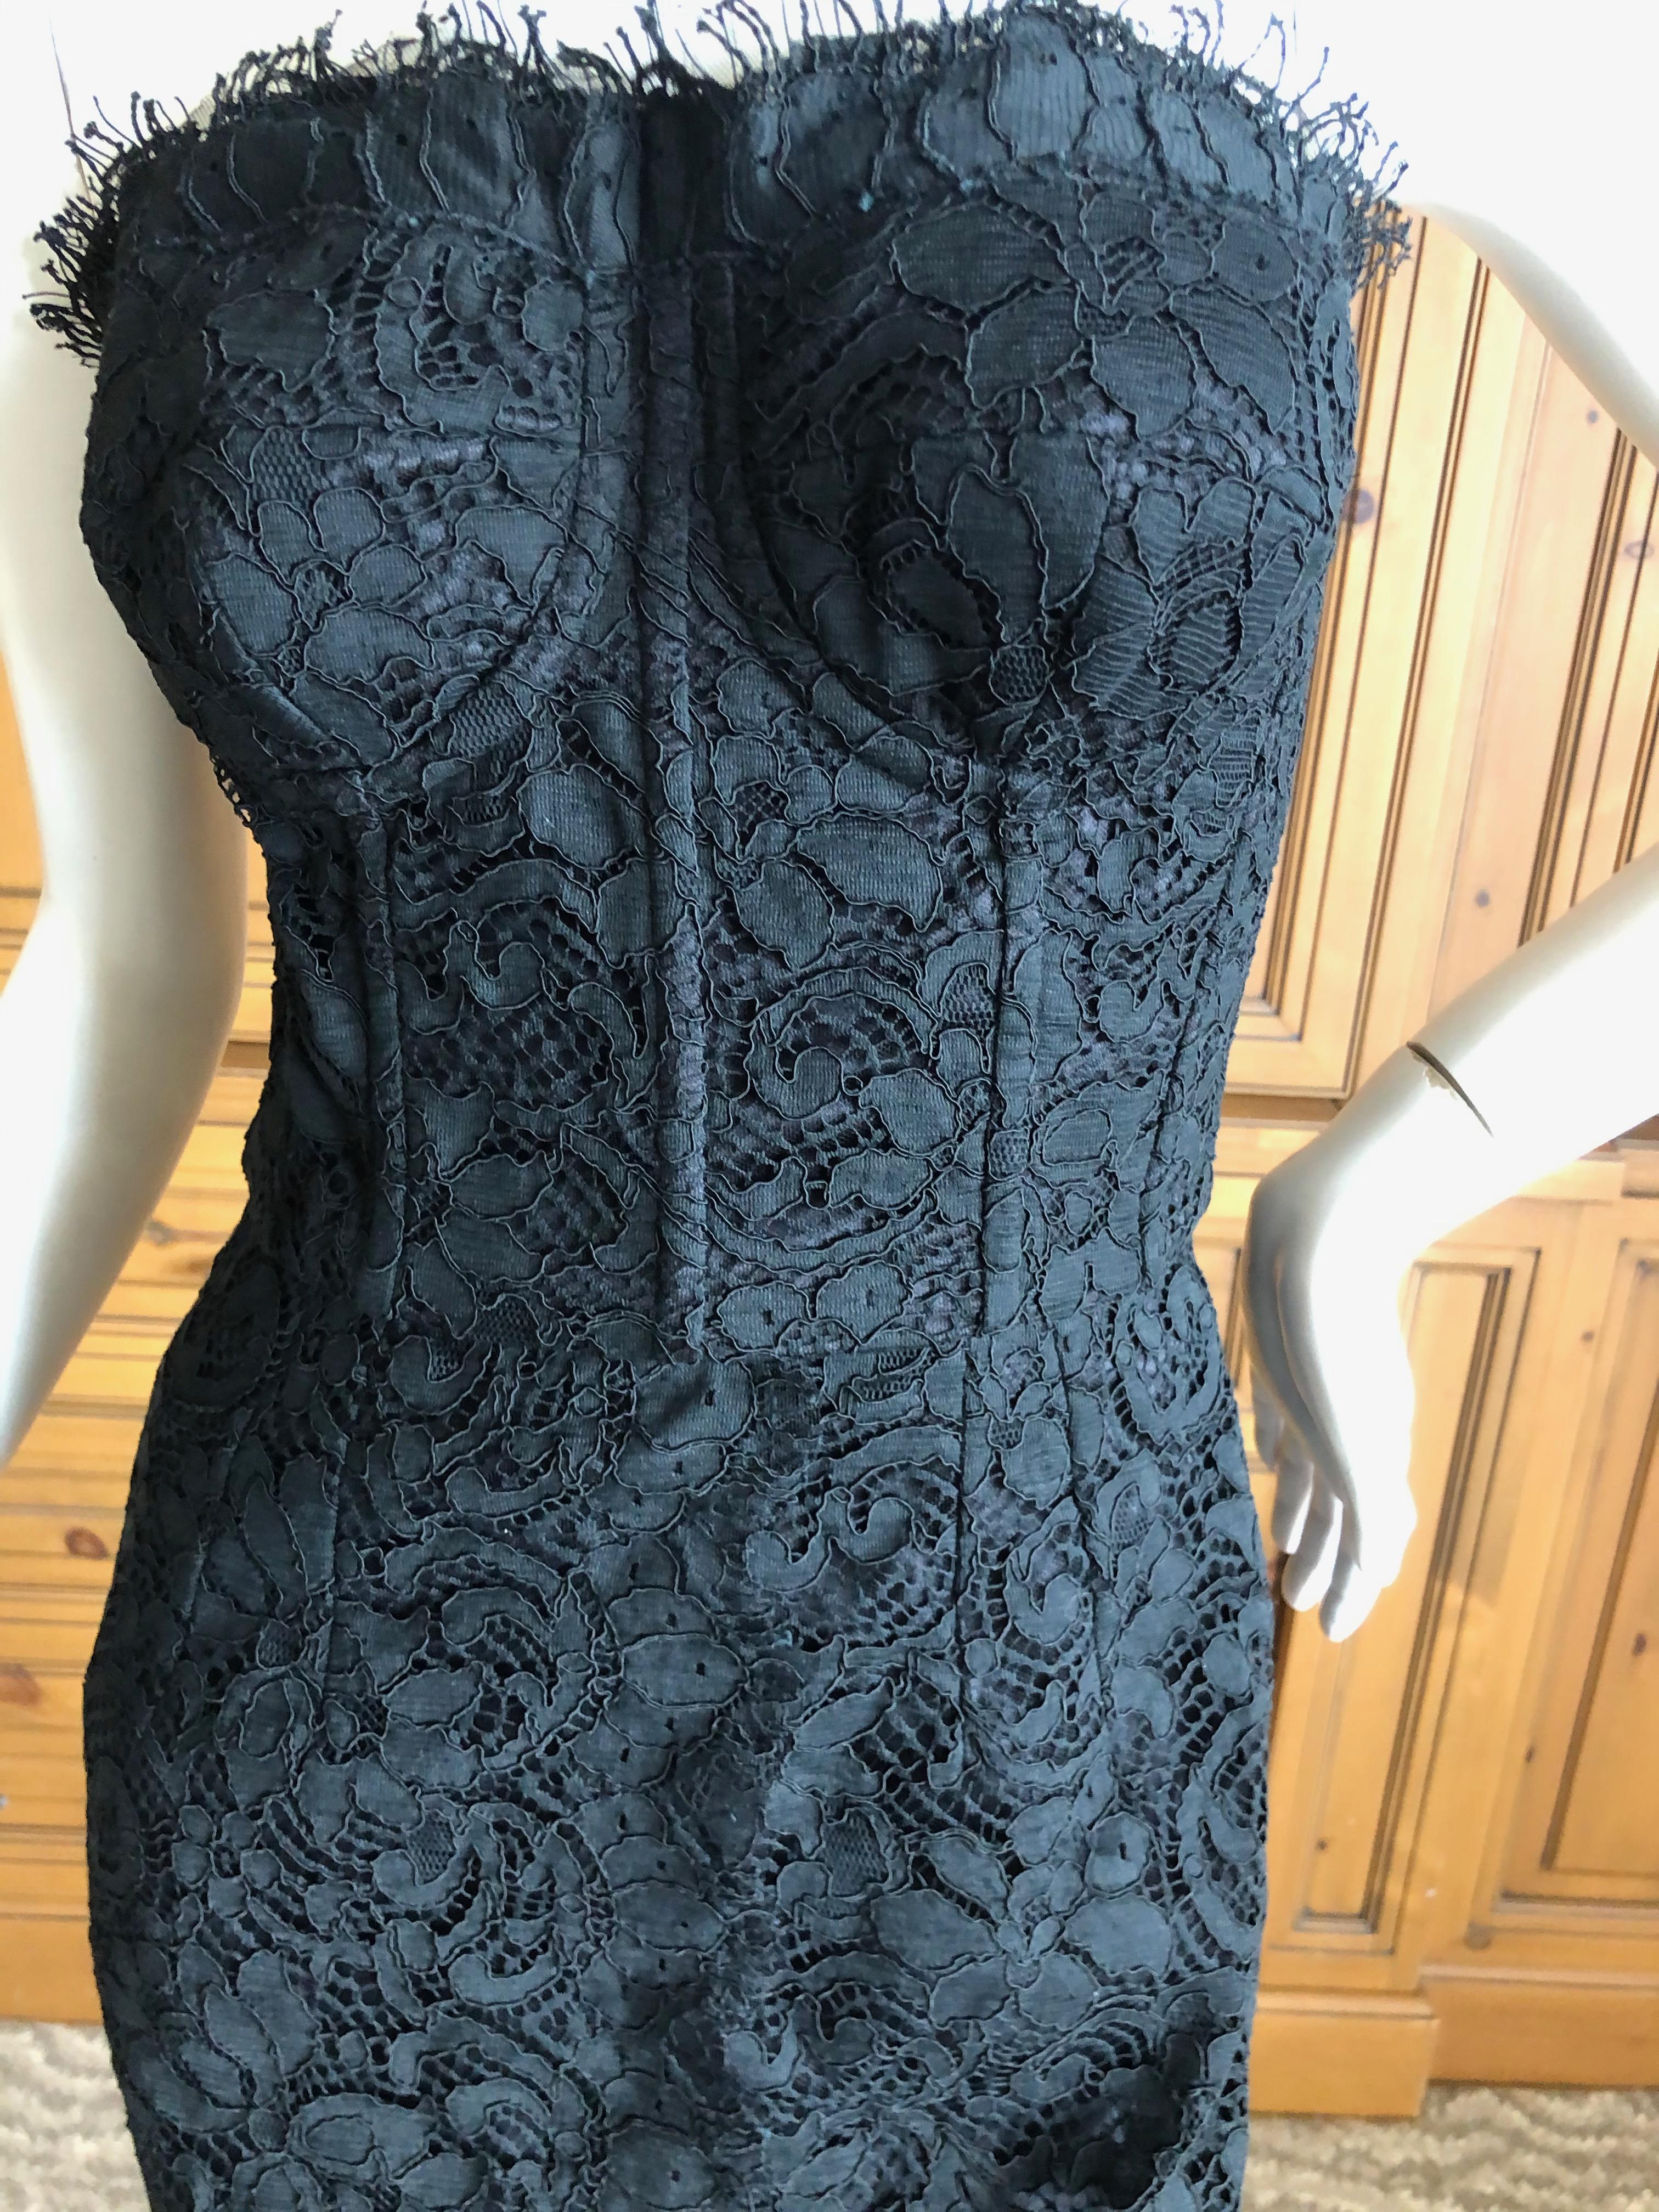 .Dolce & Gabbana Vintage Black Lace Corseted Strapless Evening Gown with Small Train.
There is a full corset. Zips up the back
This is so wonderful, so sexy. the photos don't do it justice.
Size 40
 Bust 34